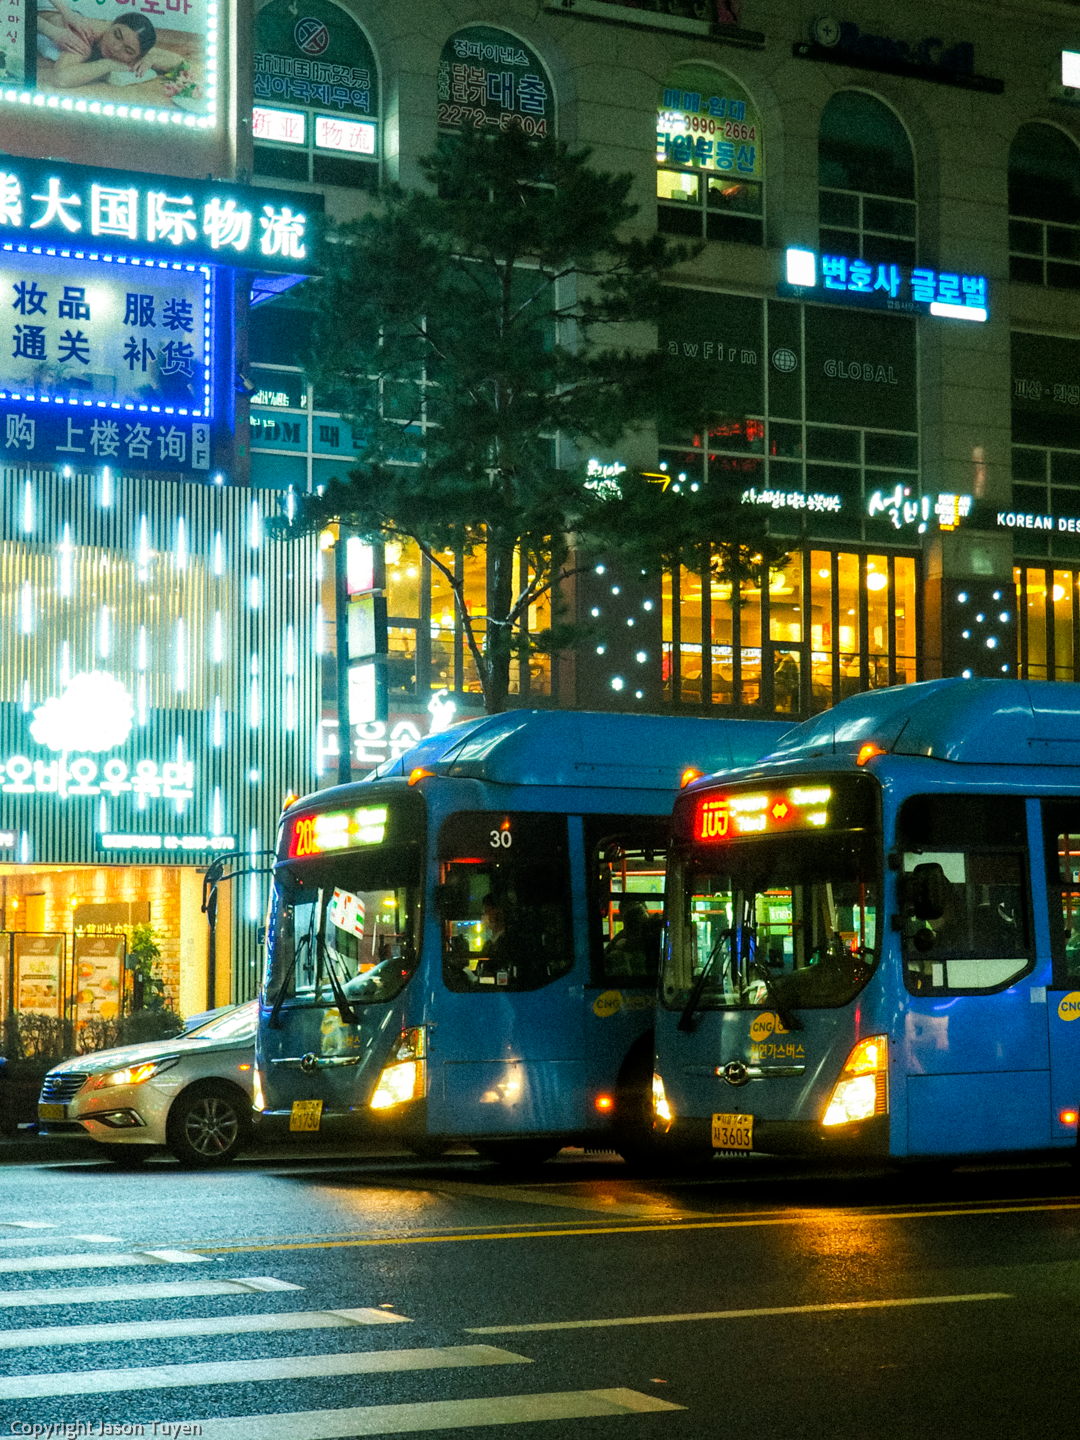 Two blue buses stopped at an intersection at night in Seoul.